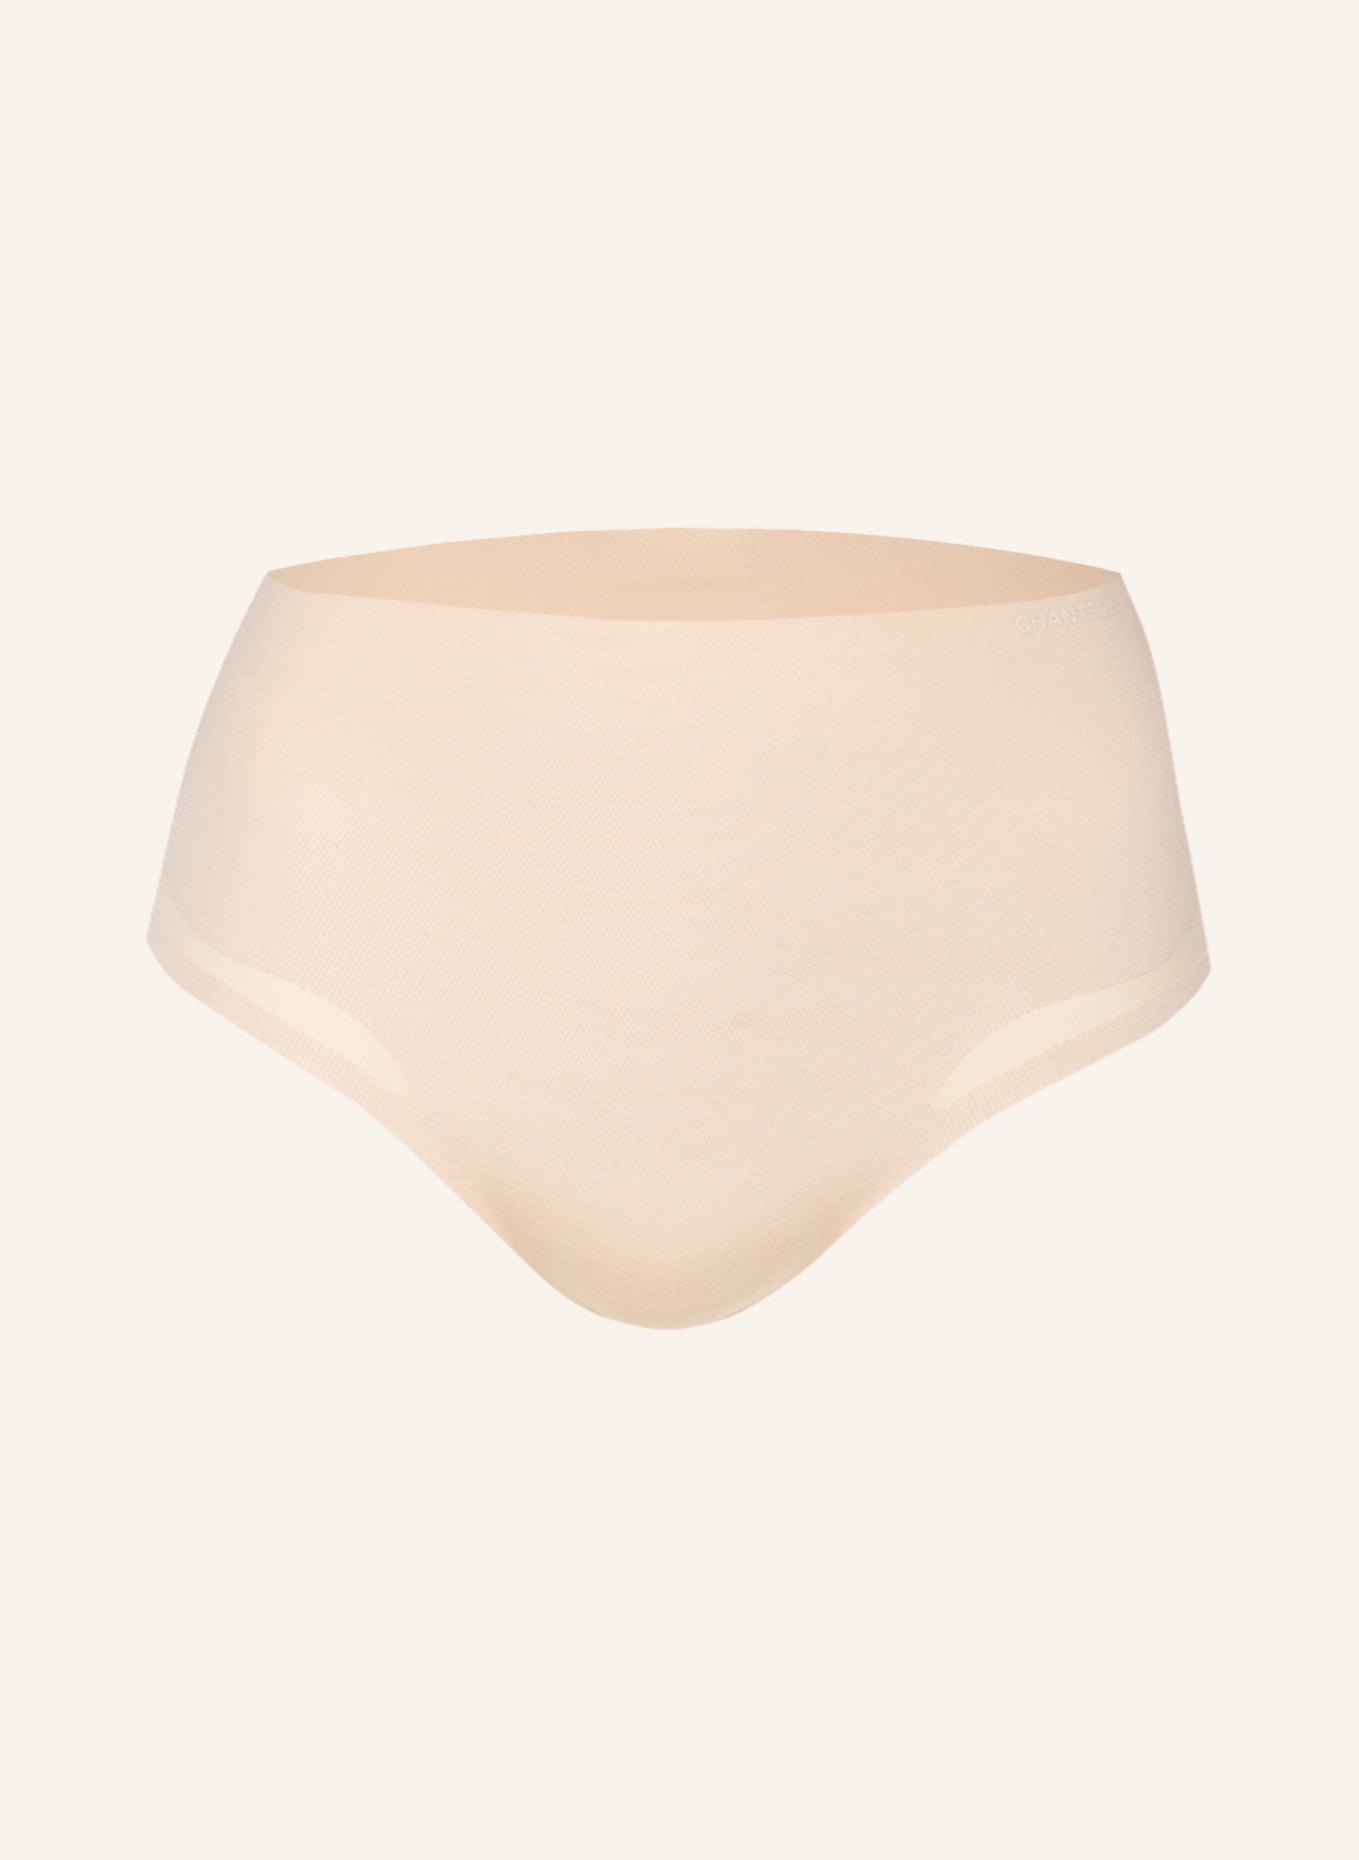 CHANTELLE Shaping briefs PURE LIGHT, Color: NUDE (Image 1)